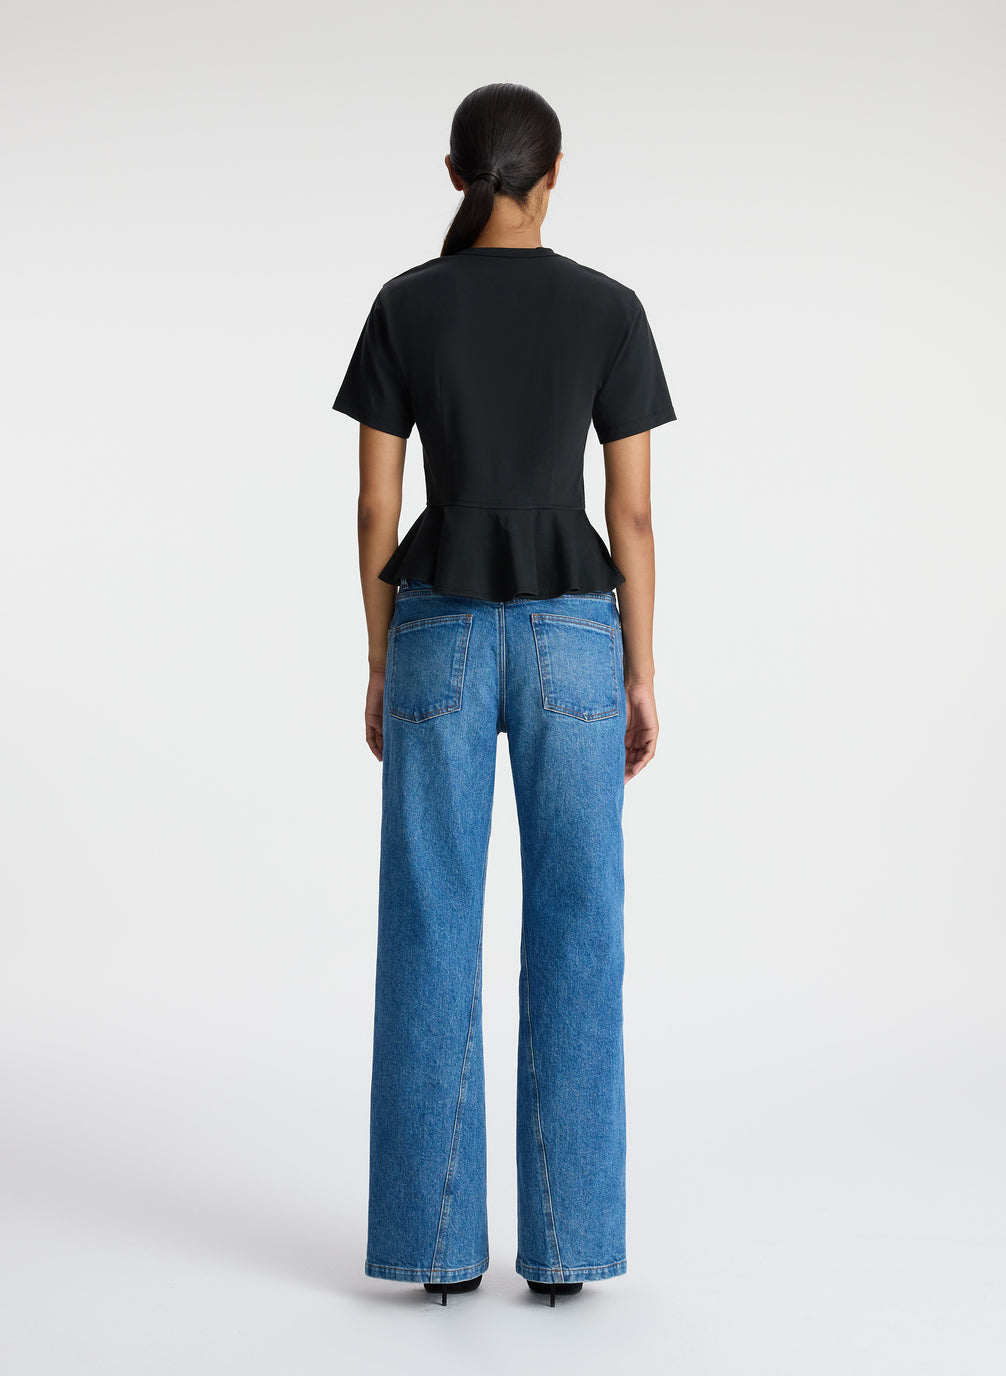 back view of woman wearing black peplum tee and blue jeans